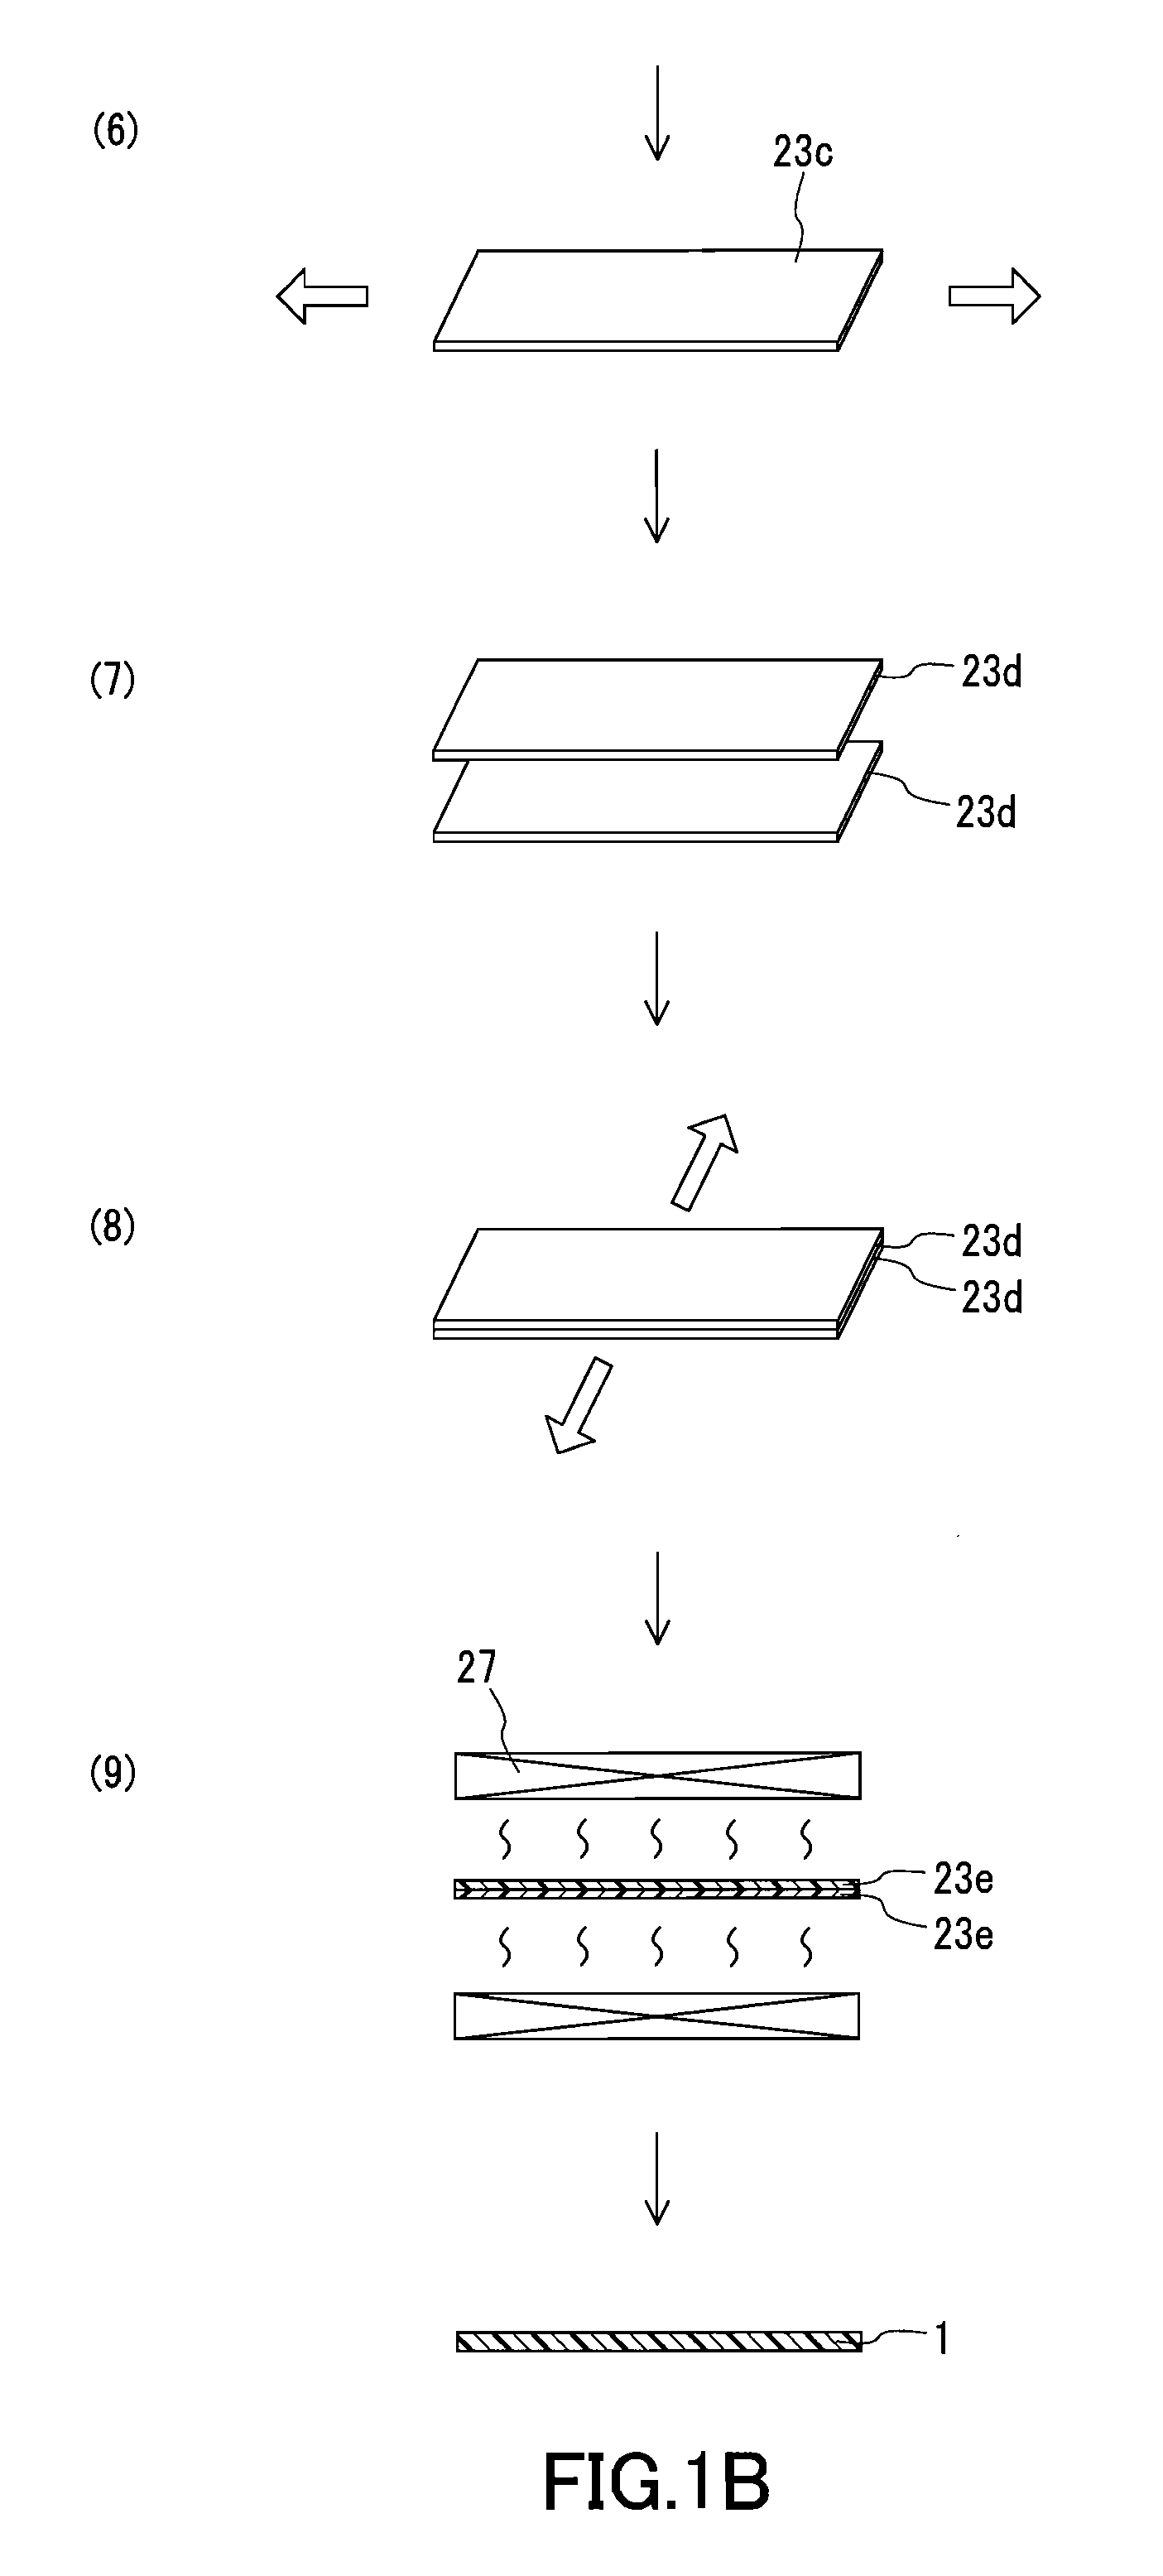 Water-proof sound-transmitting membrane, method for producing the water-proof sound-transmitting membrane, and electrical appliance including the water-proof sound-transmitting membrane